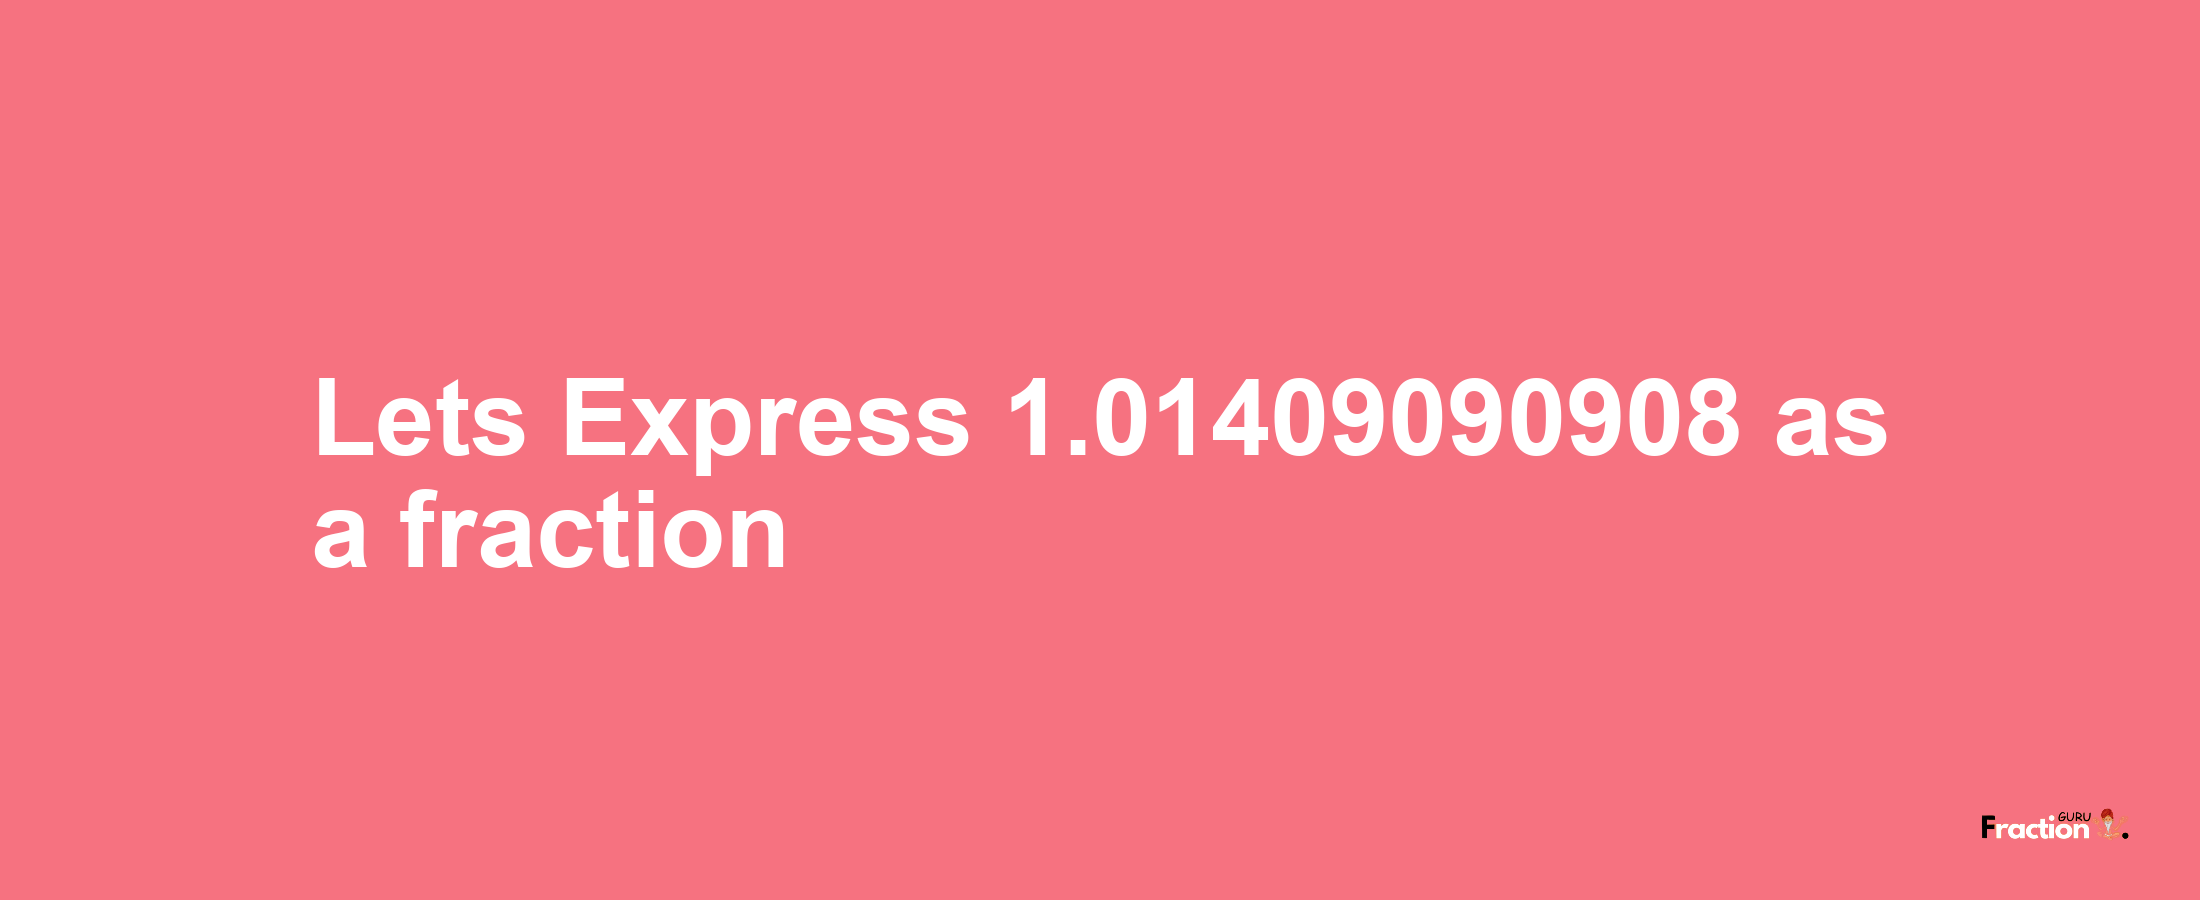 Lets Express 1.01409090908 as afraction